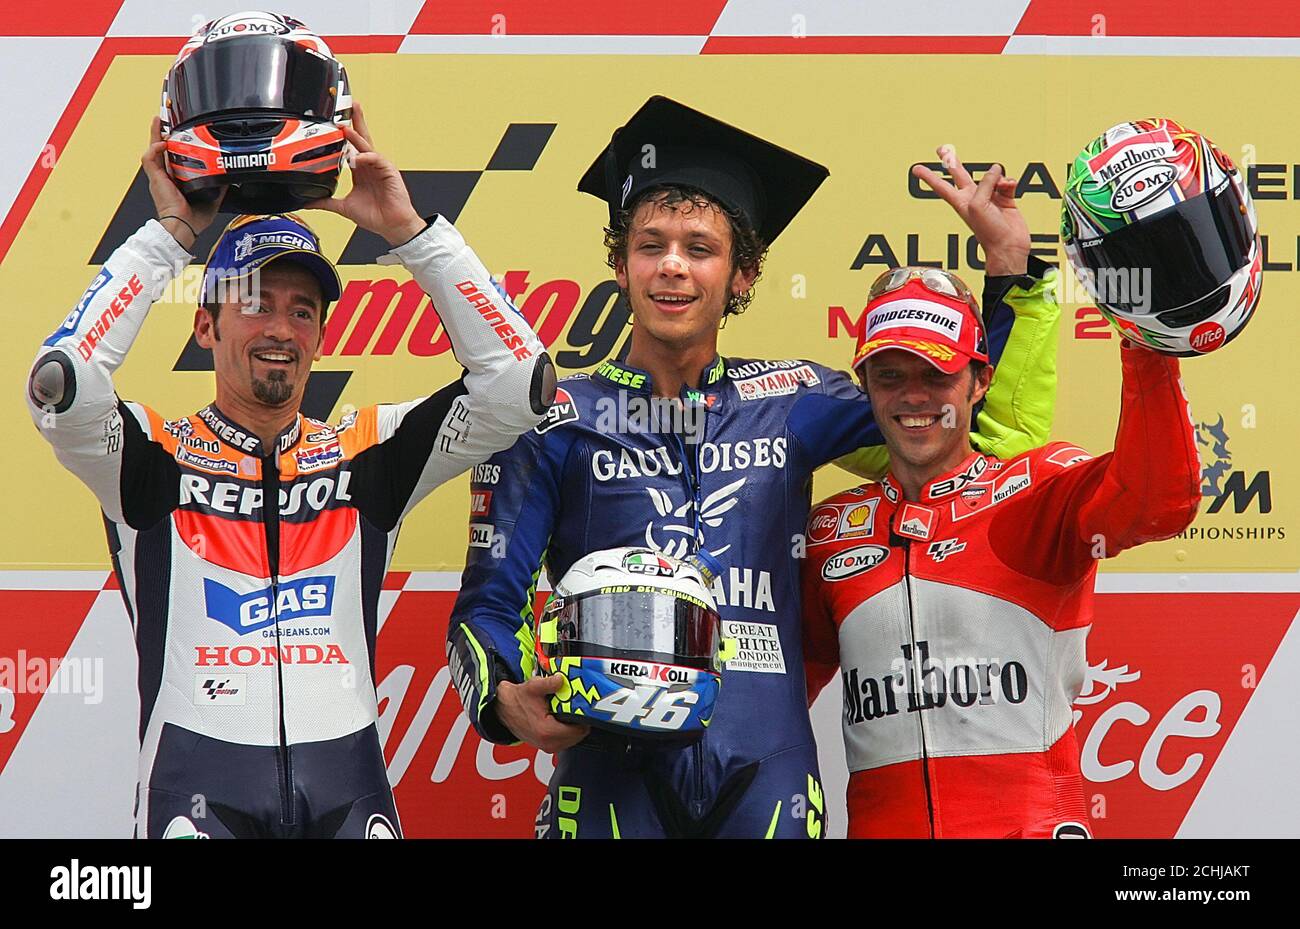 Italy's Rossi, Biaggi and Capirossi pose on the podium at the end of the  Italian Motorcycle Grand Prix in Mugello. Italy's Valentino Rossi (C) and  countrymen Max Biaggi (L) and Loris Capirossi